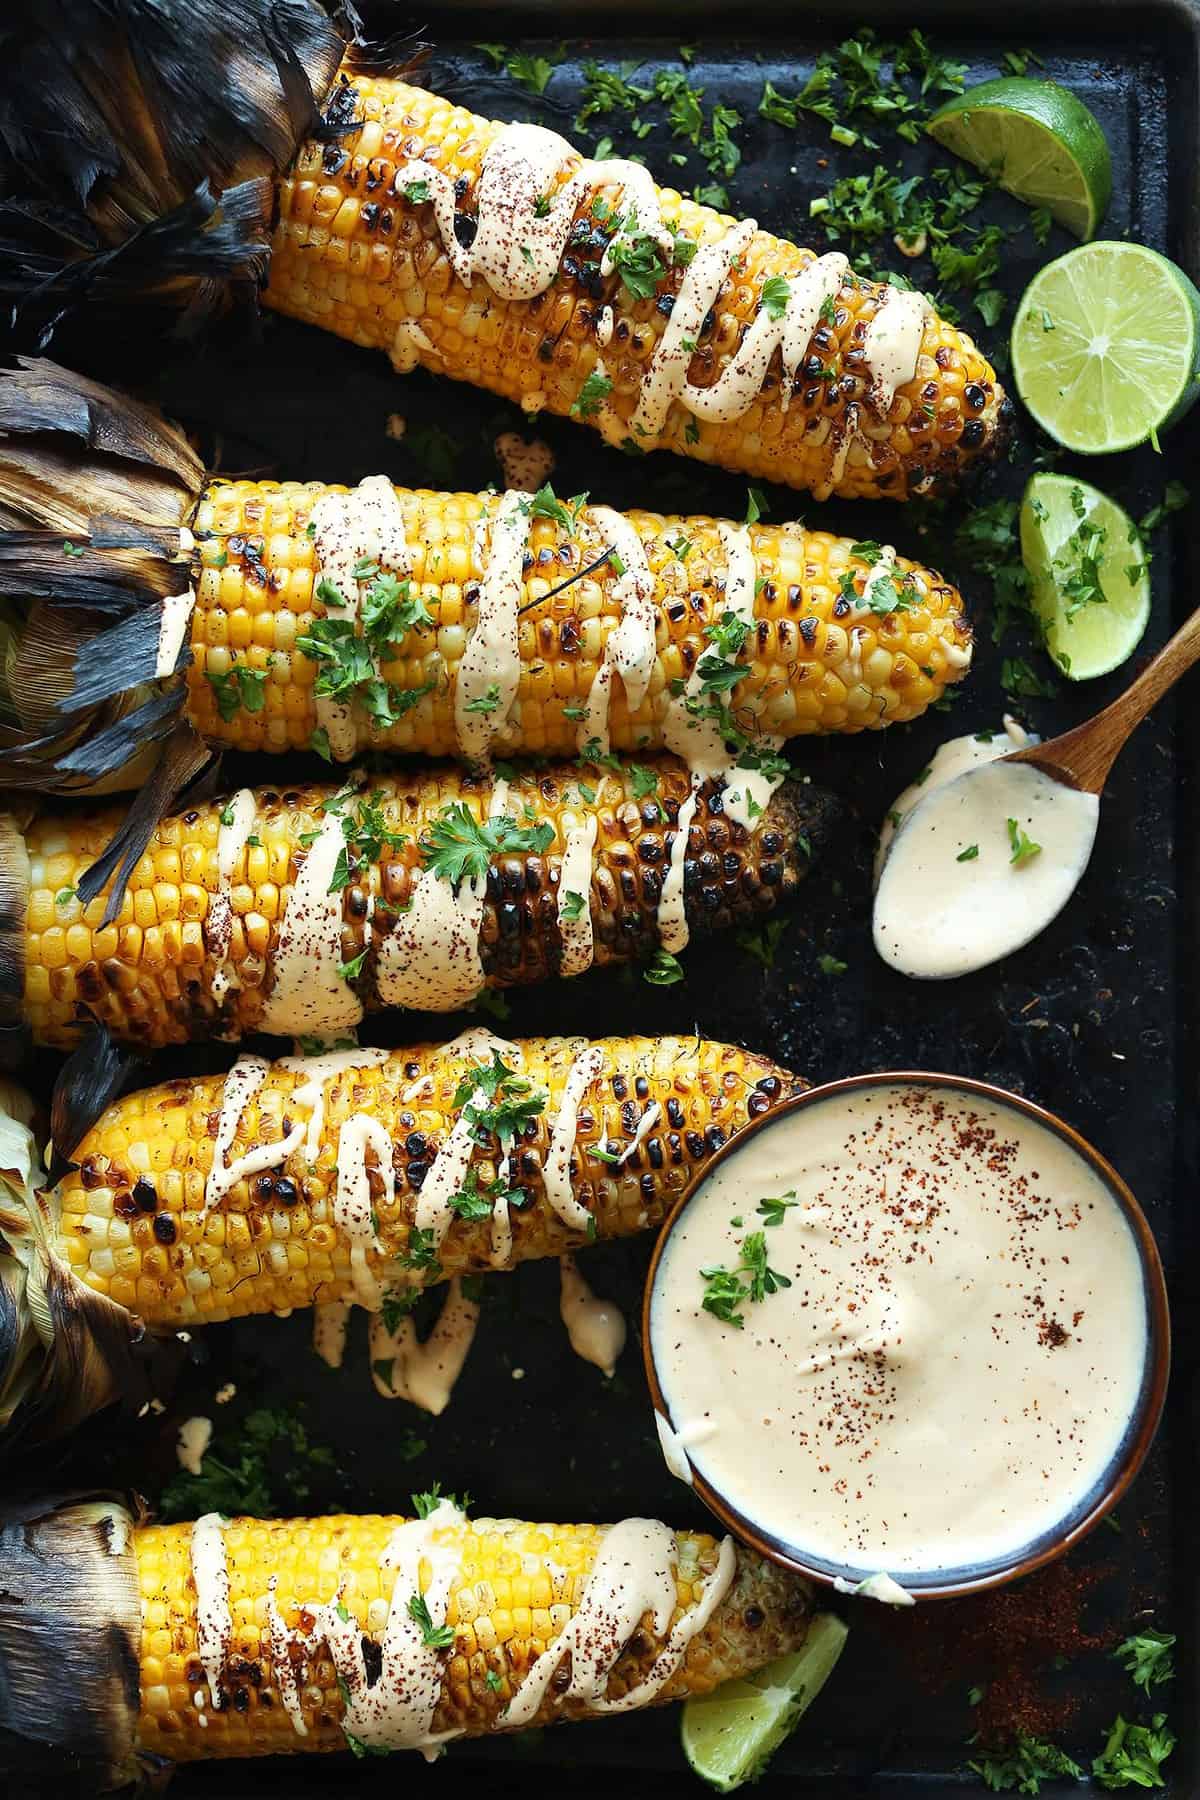  Nothing says summer quite like sweet, juicy grilled corn.